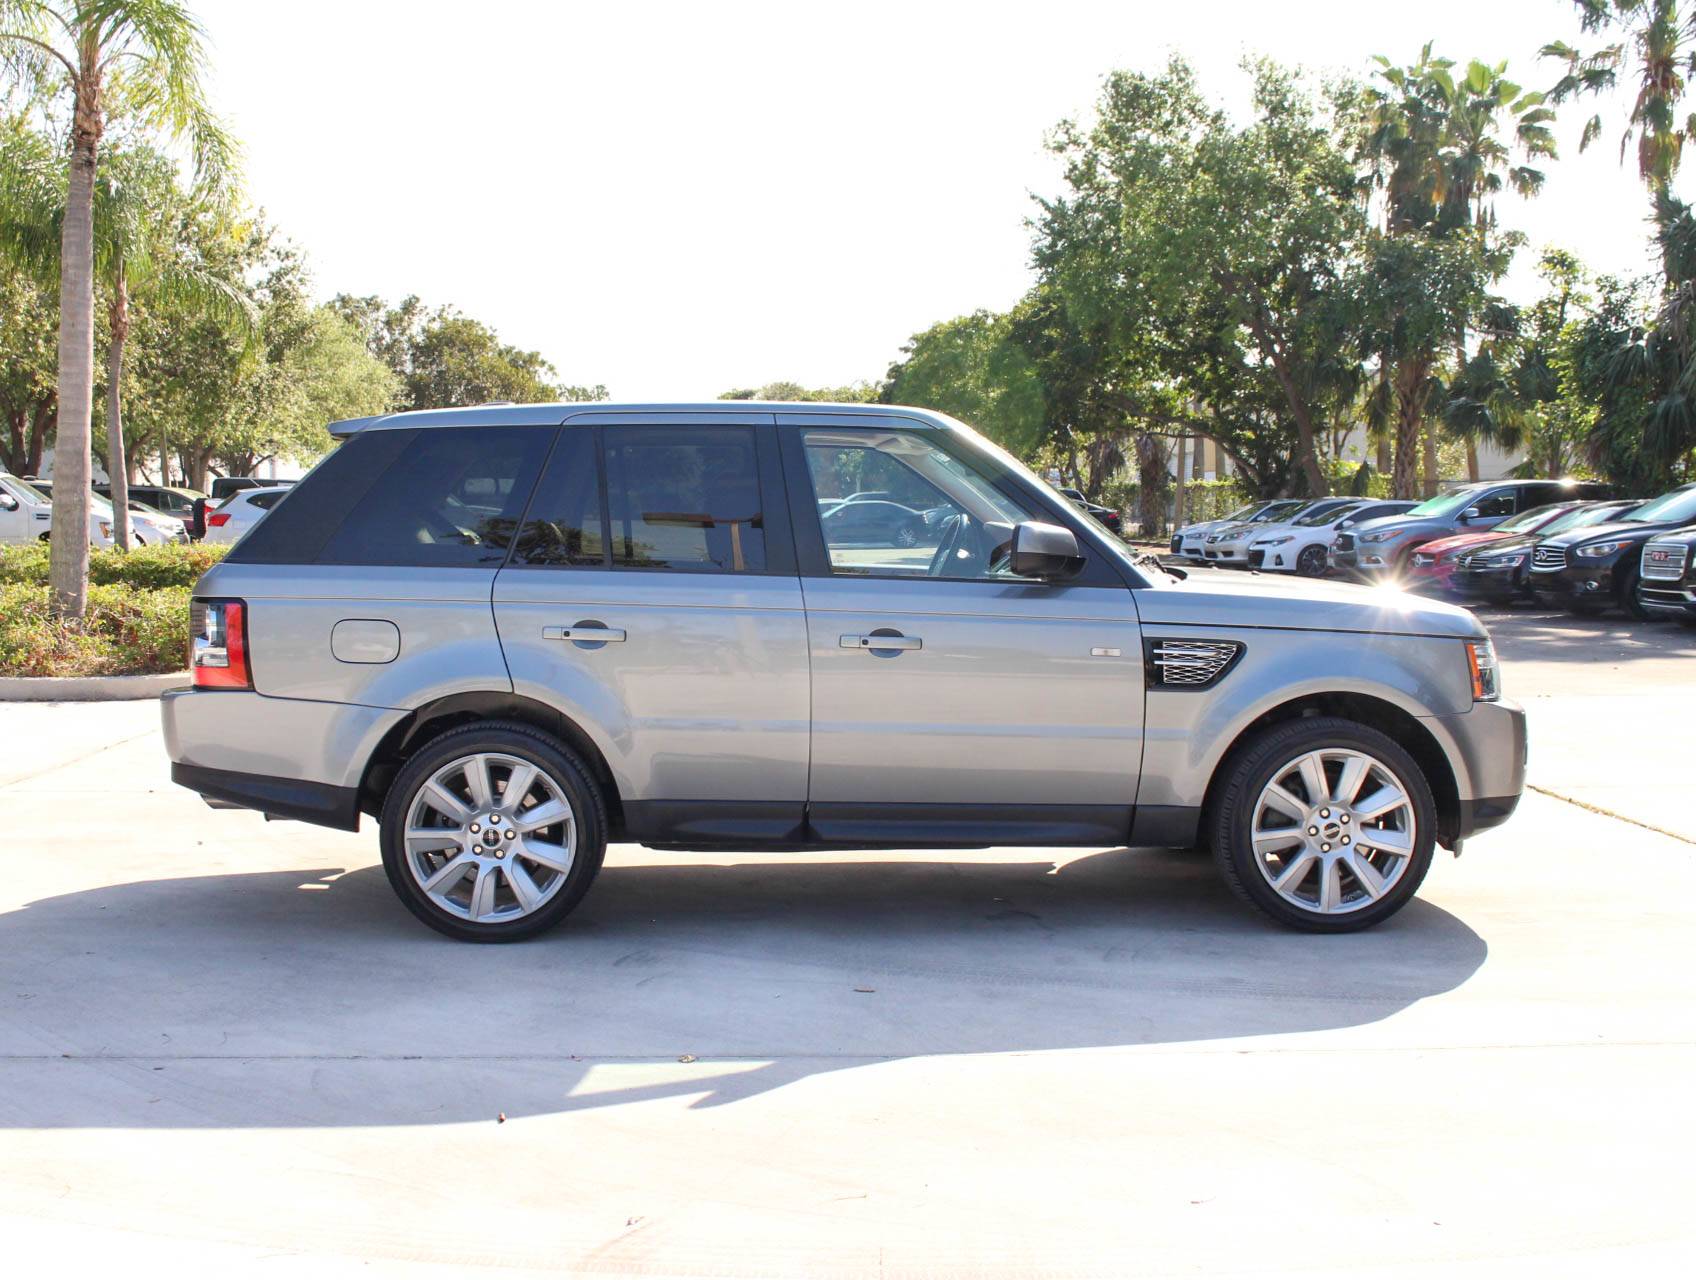 Florida Fine Cars - Used LAND ROVER RANGE ROVER SPORT 2013 WEST PALM HSE LUX